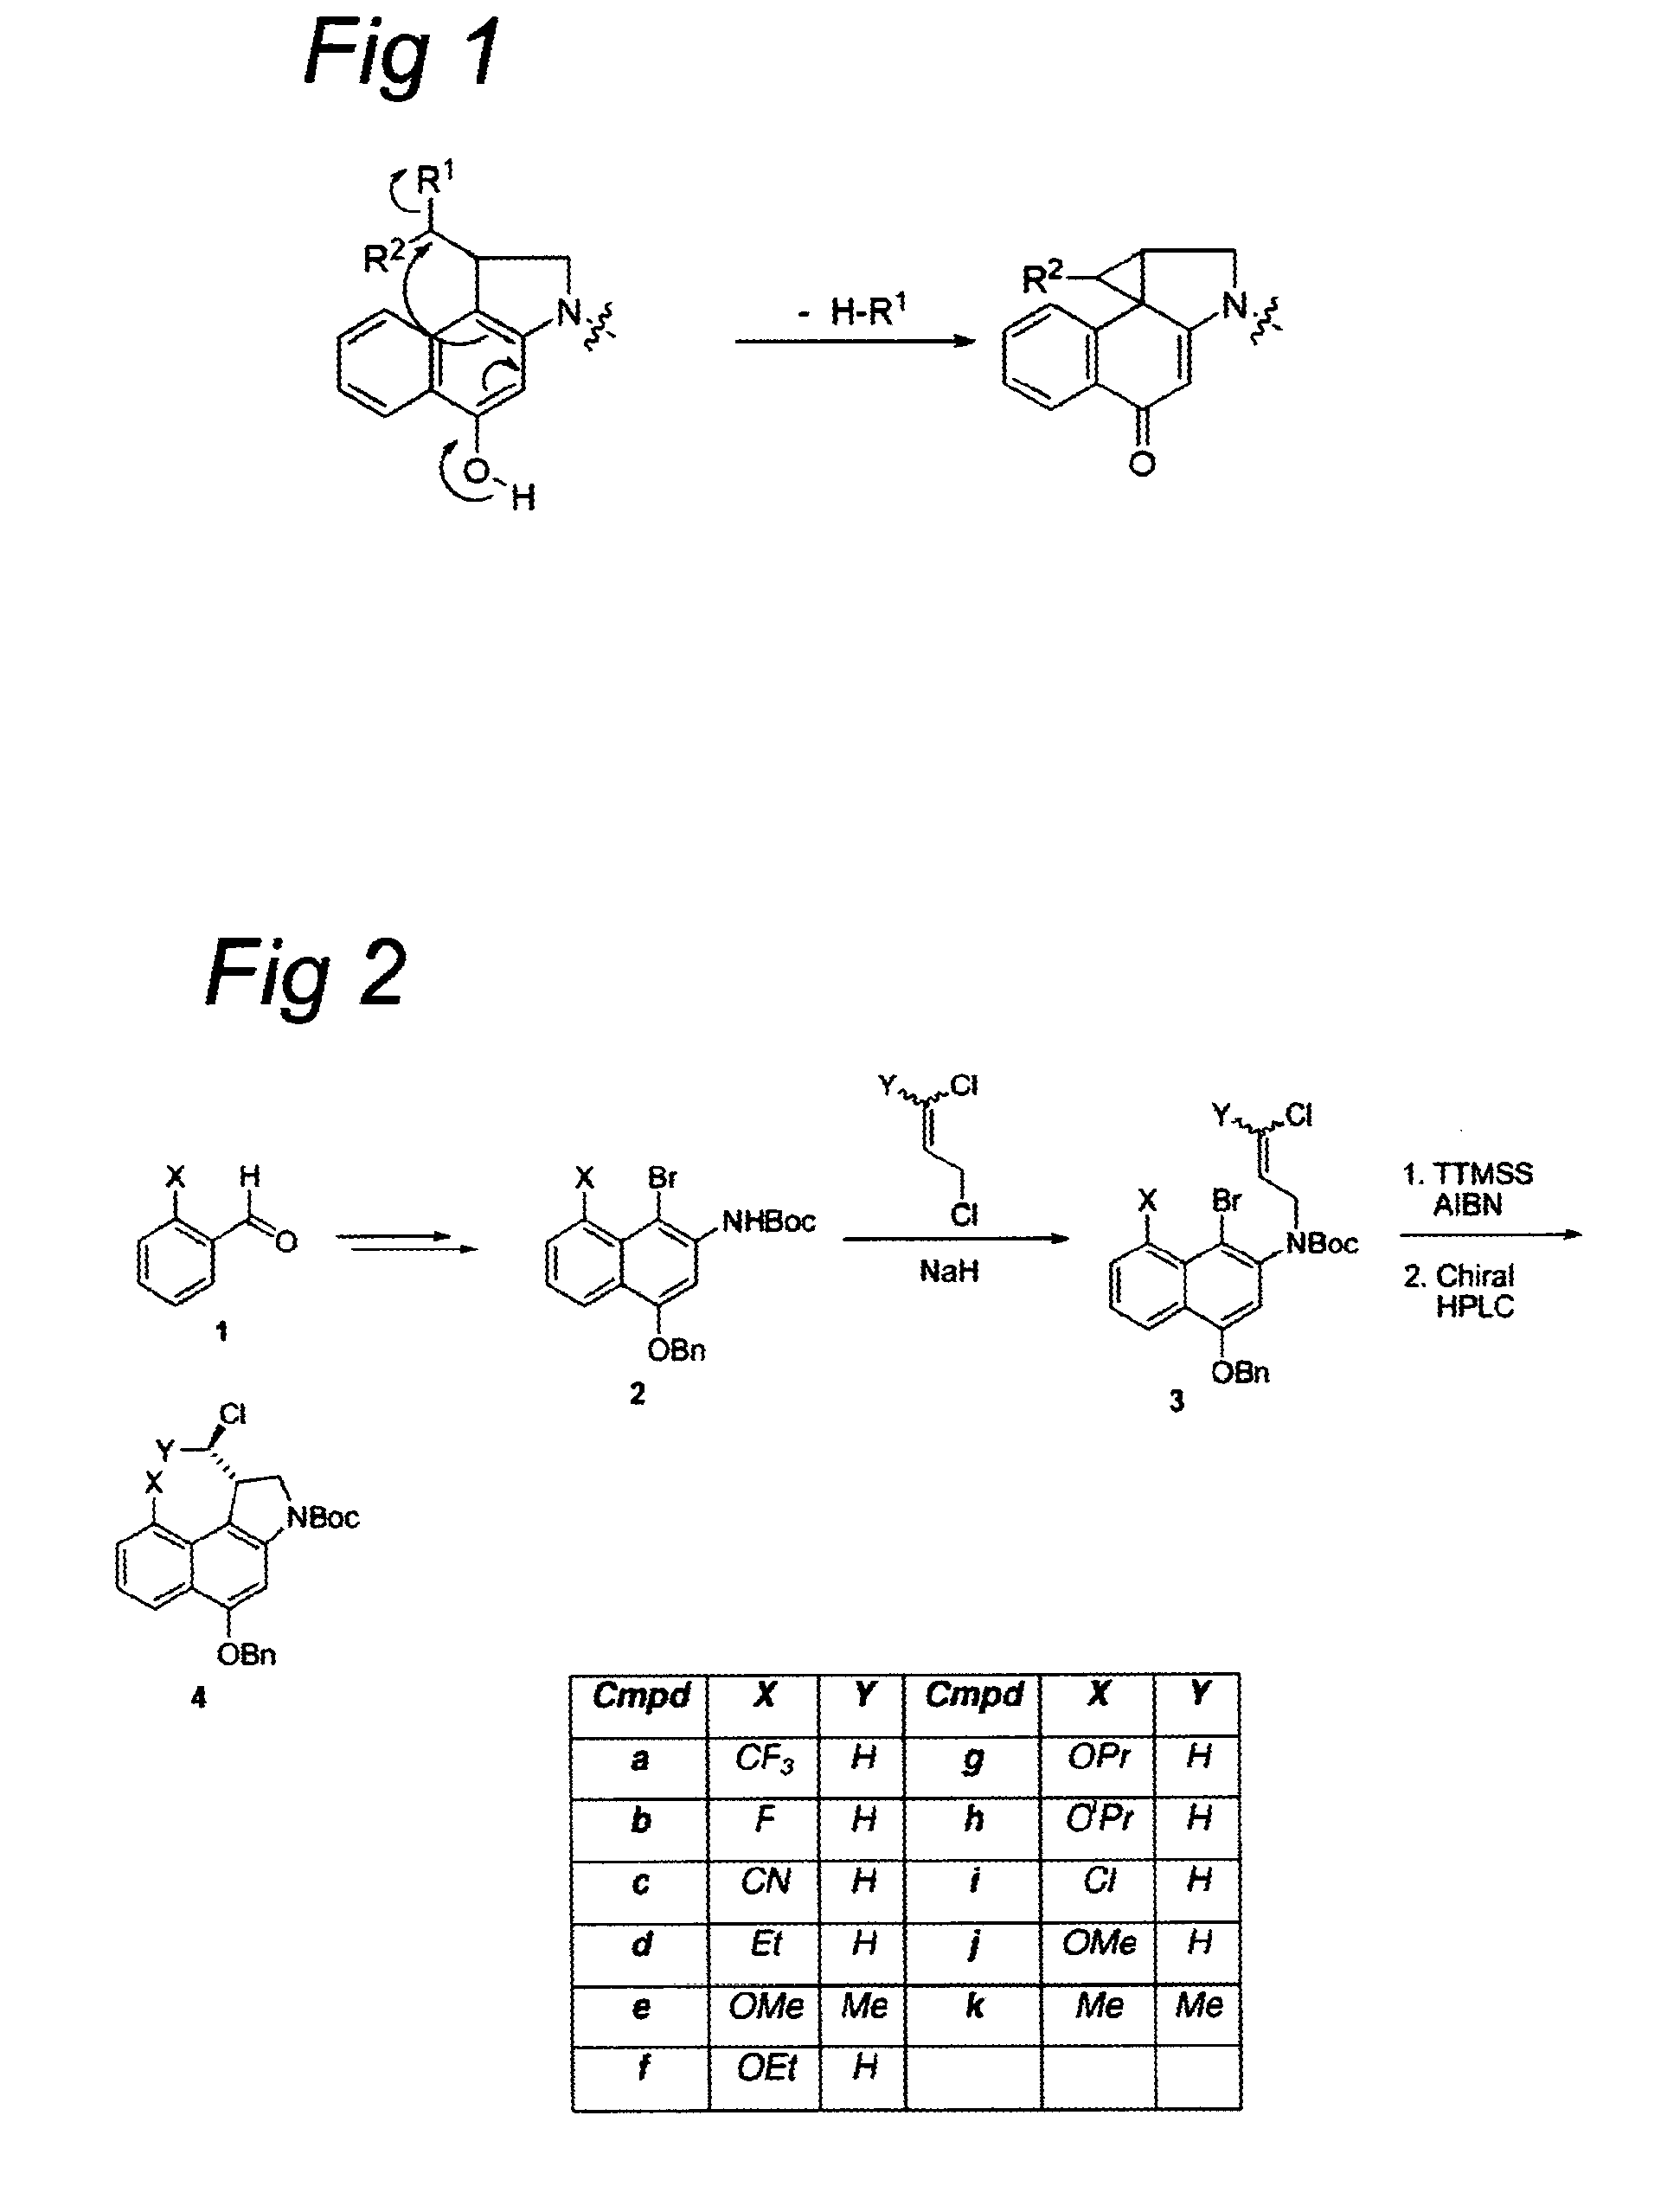 CC-1065 analogs and their conjugates